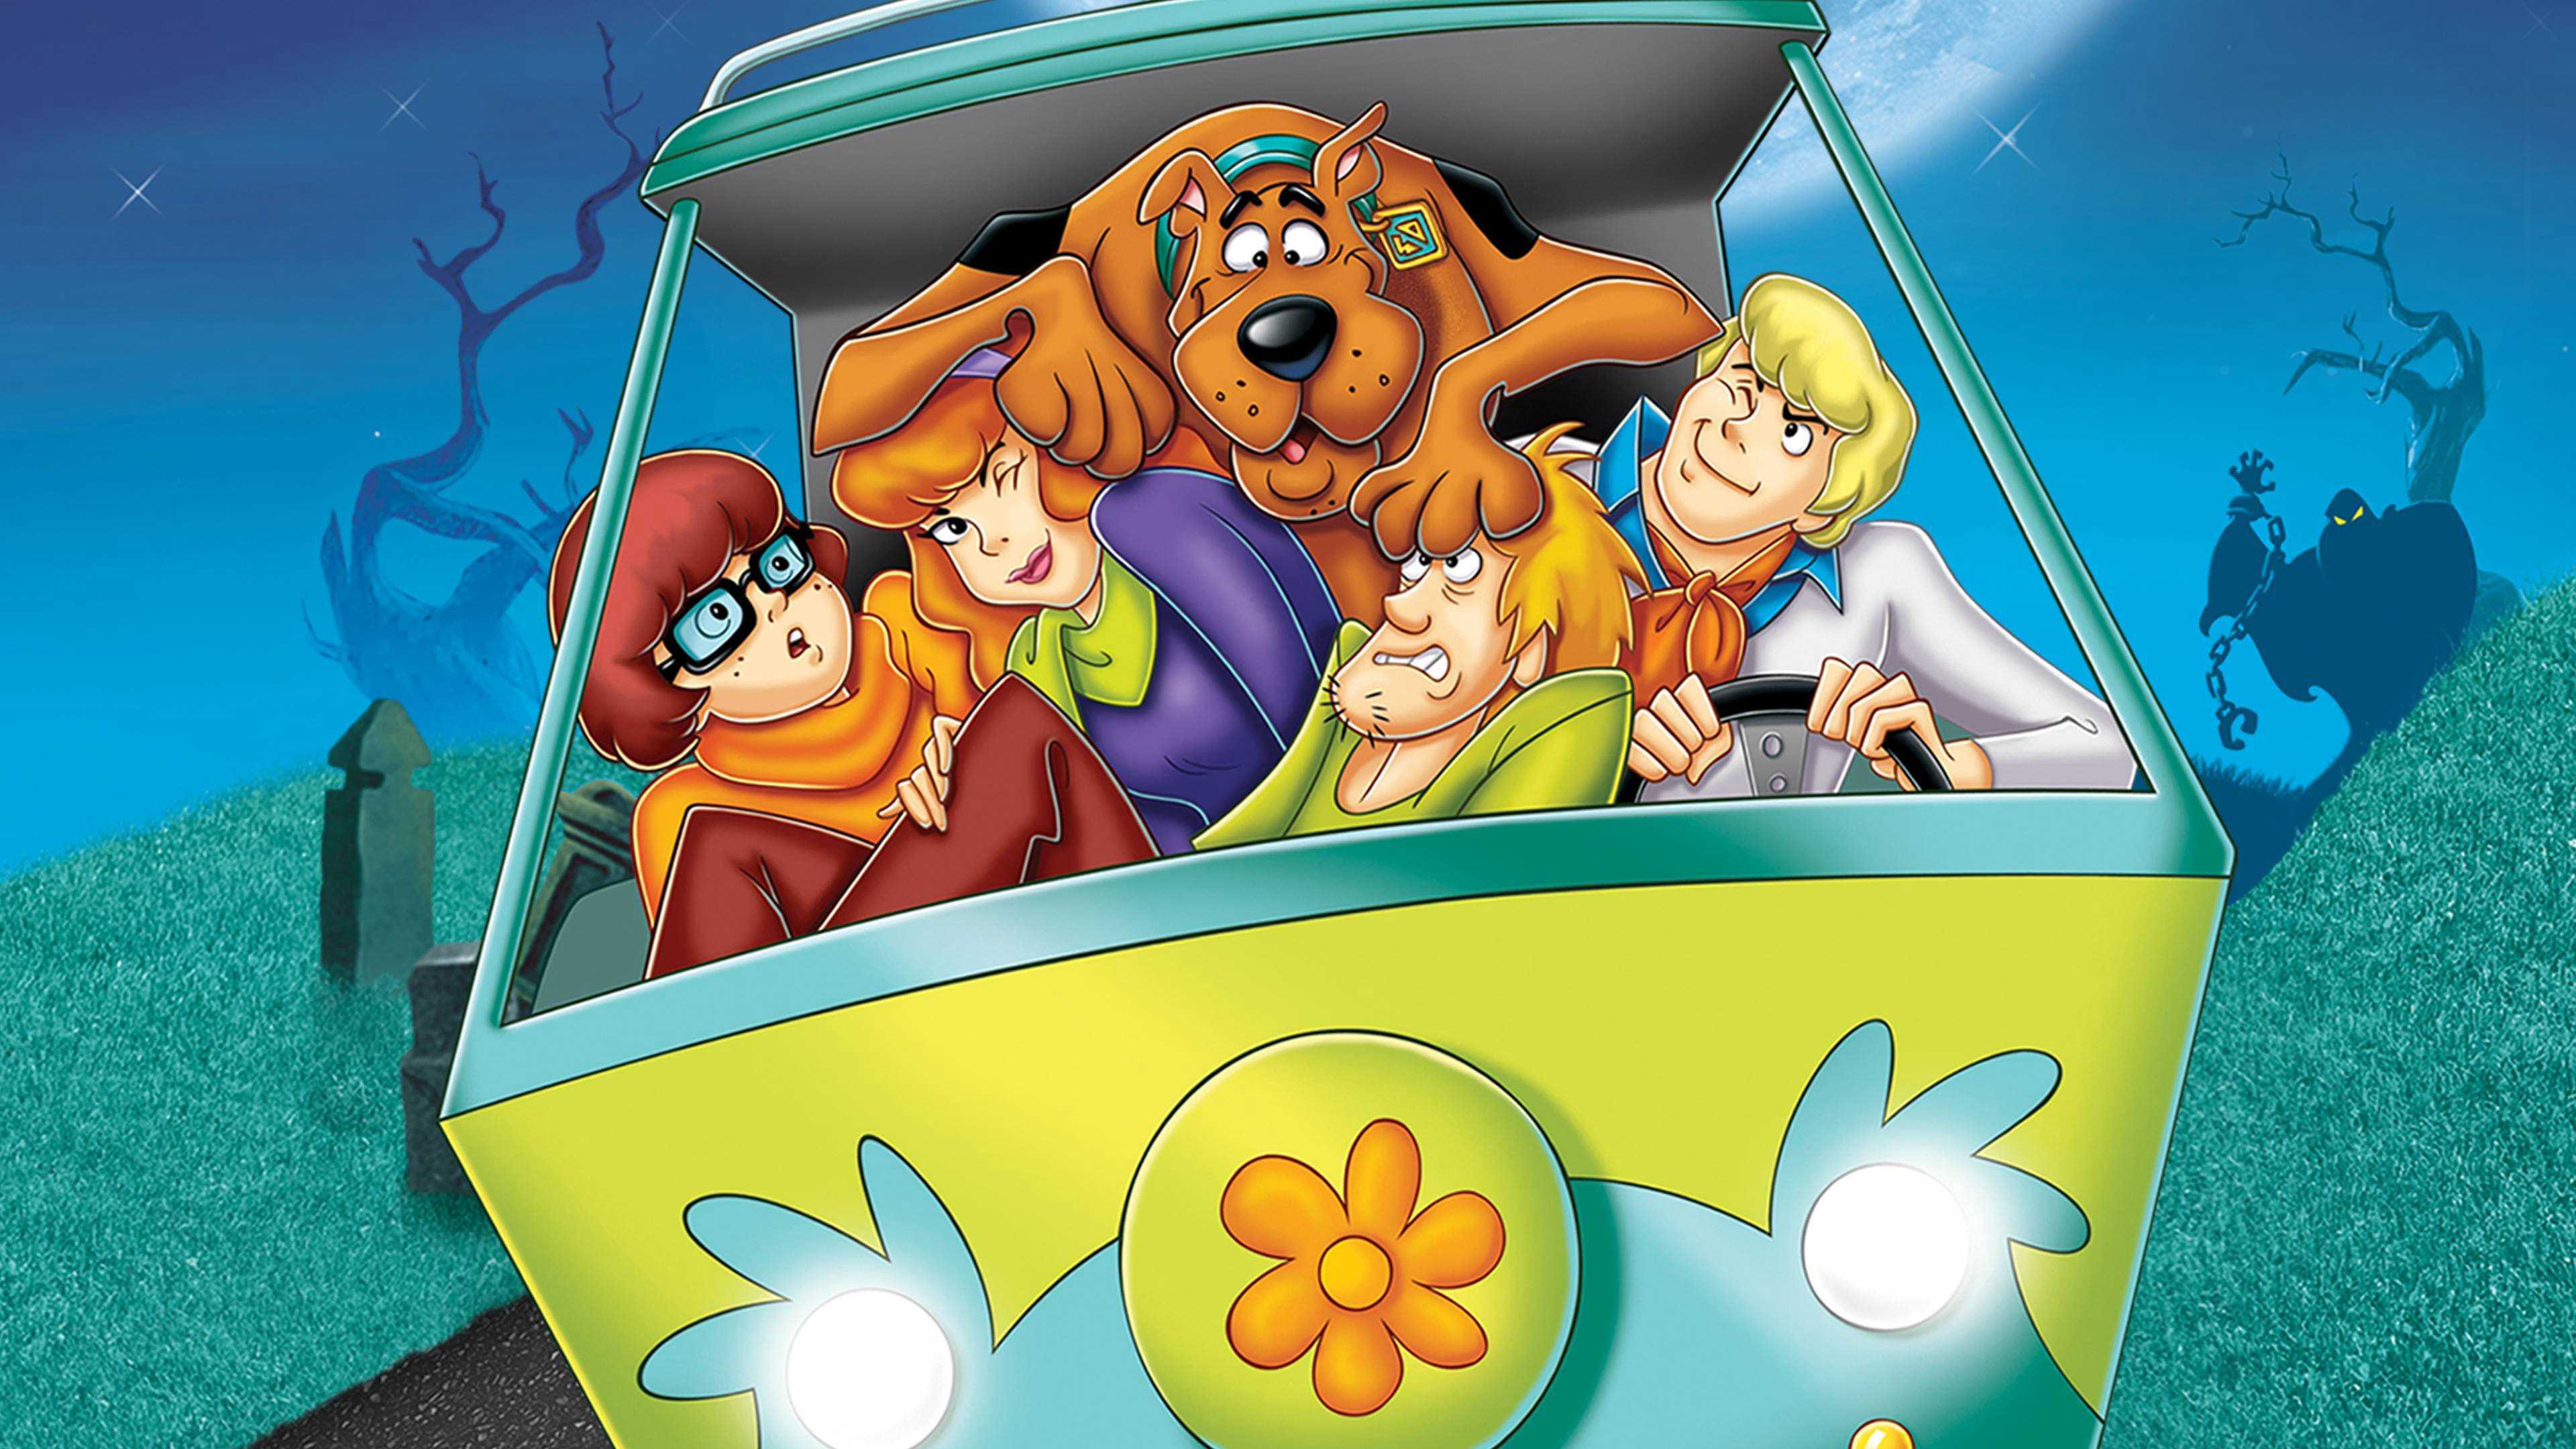 Scooby-doo, where are you! (phần 1) - Scooby-doo